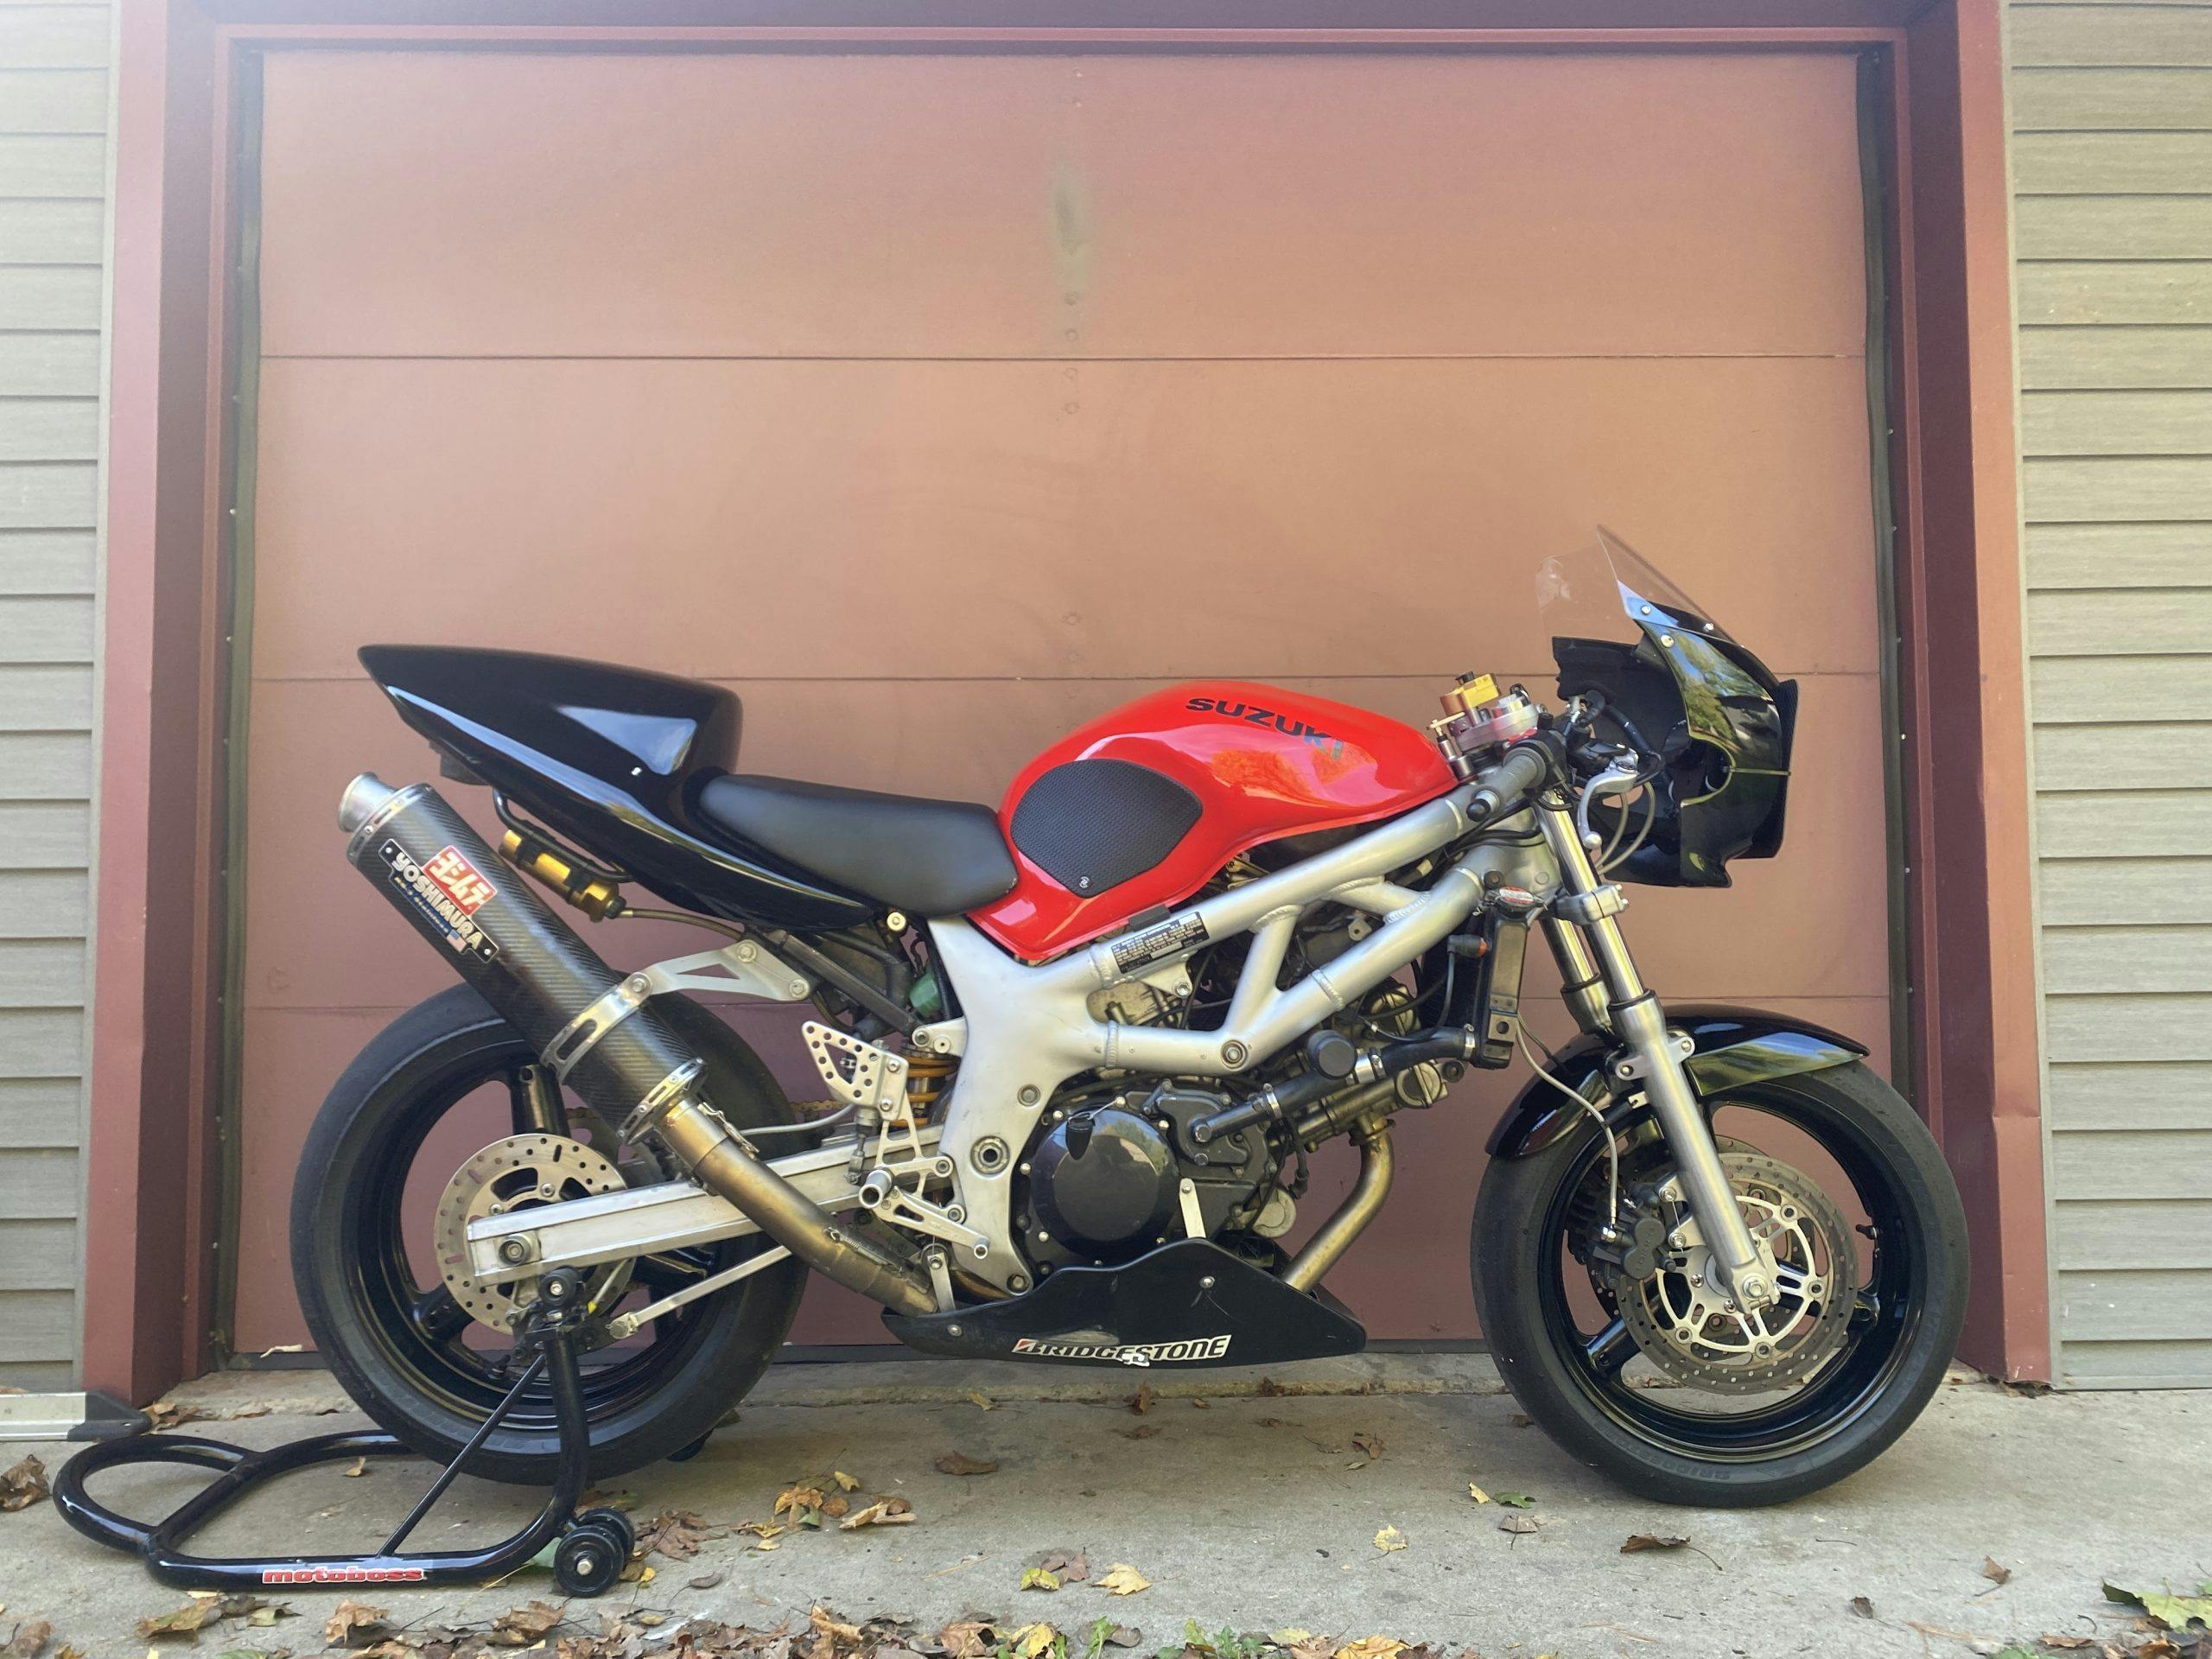 SV650 side view